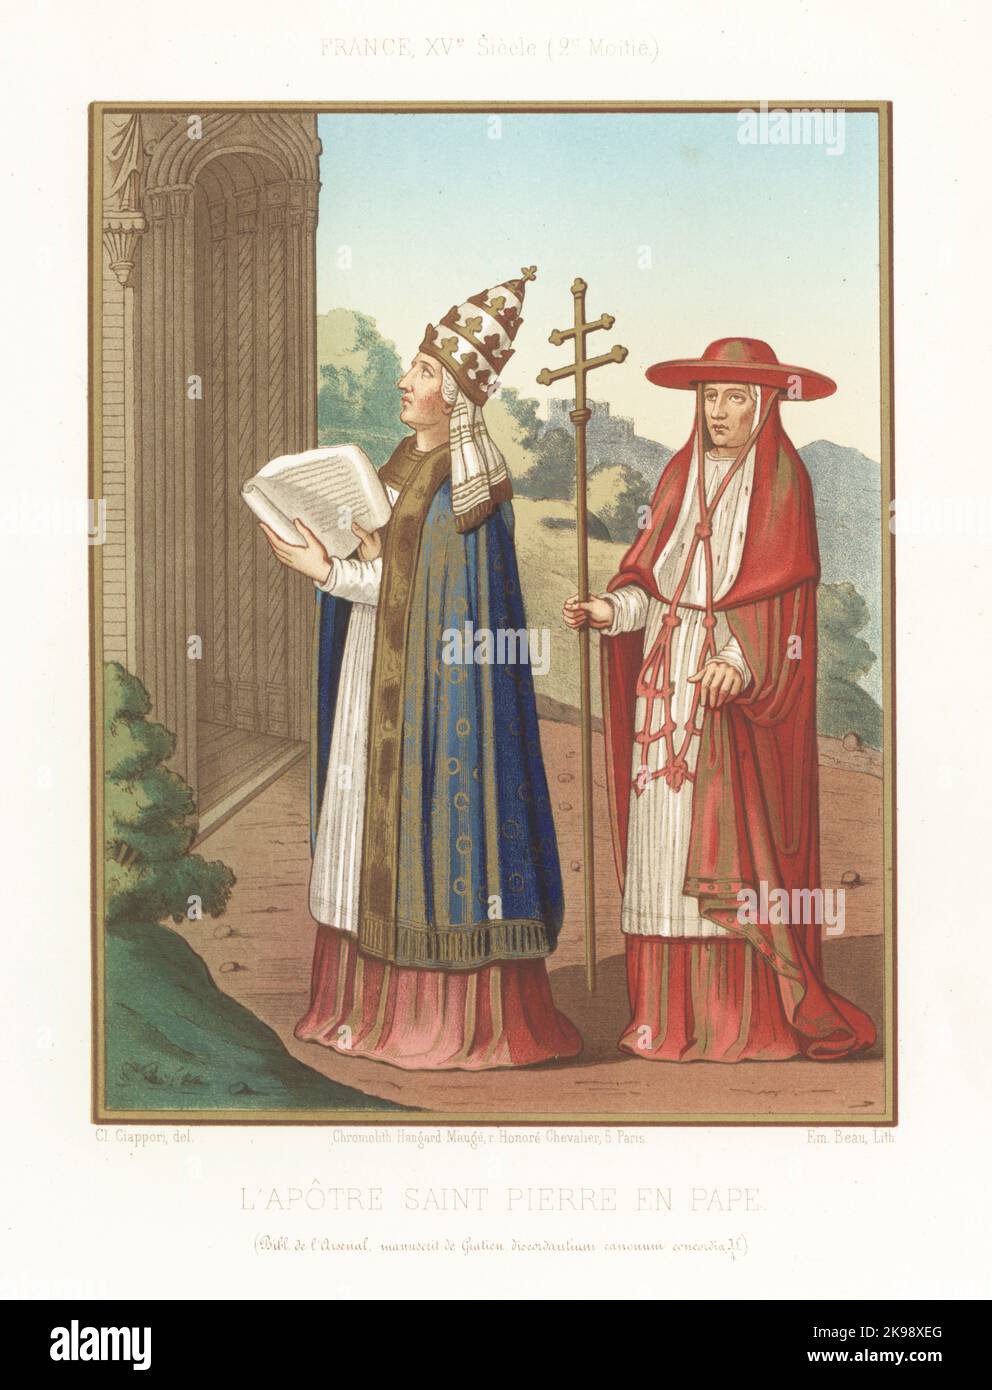 Saint Peter in the costume of a 15th century pope. In triregnum crown holding a bible, cardinal in scarlet habit and zucchetto holding a papal cross with two crossbars [sic]. L'Apotre Saint Pierre en Pape. France, XVe siecle. Taken from Gratian's Decretum, MS JL4, Bibliotheque de l'Arsenal. Chromolithograph by Emile Beau after an illustration by Claudius Joseph Ciappori from Charles Louandre’s Les Arts Somptuaires, The Sumptuary Arts, Hangard-Mauge, Paris, 1858. Stock Photo